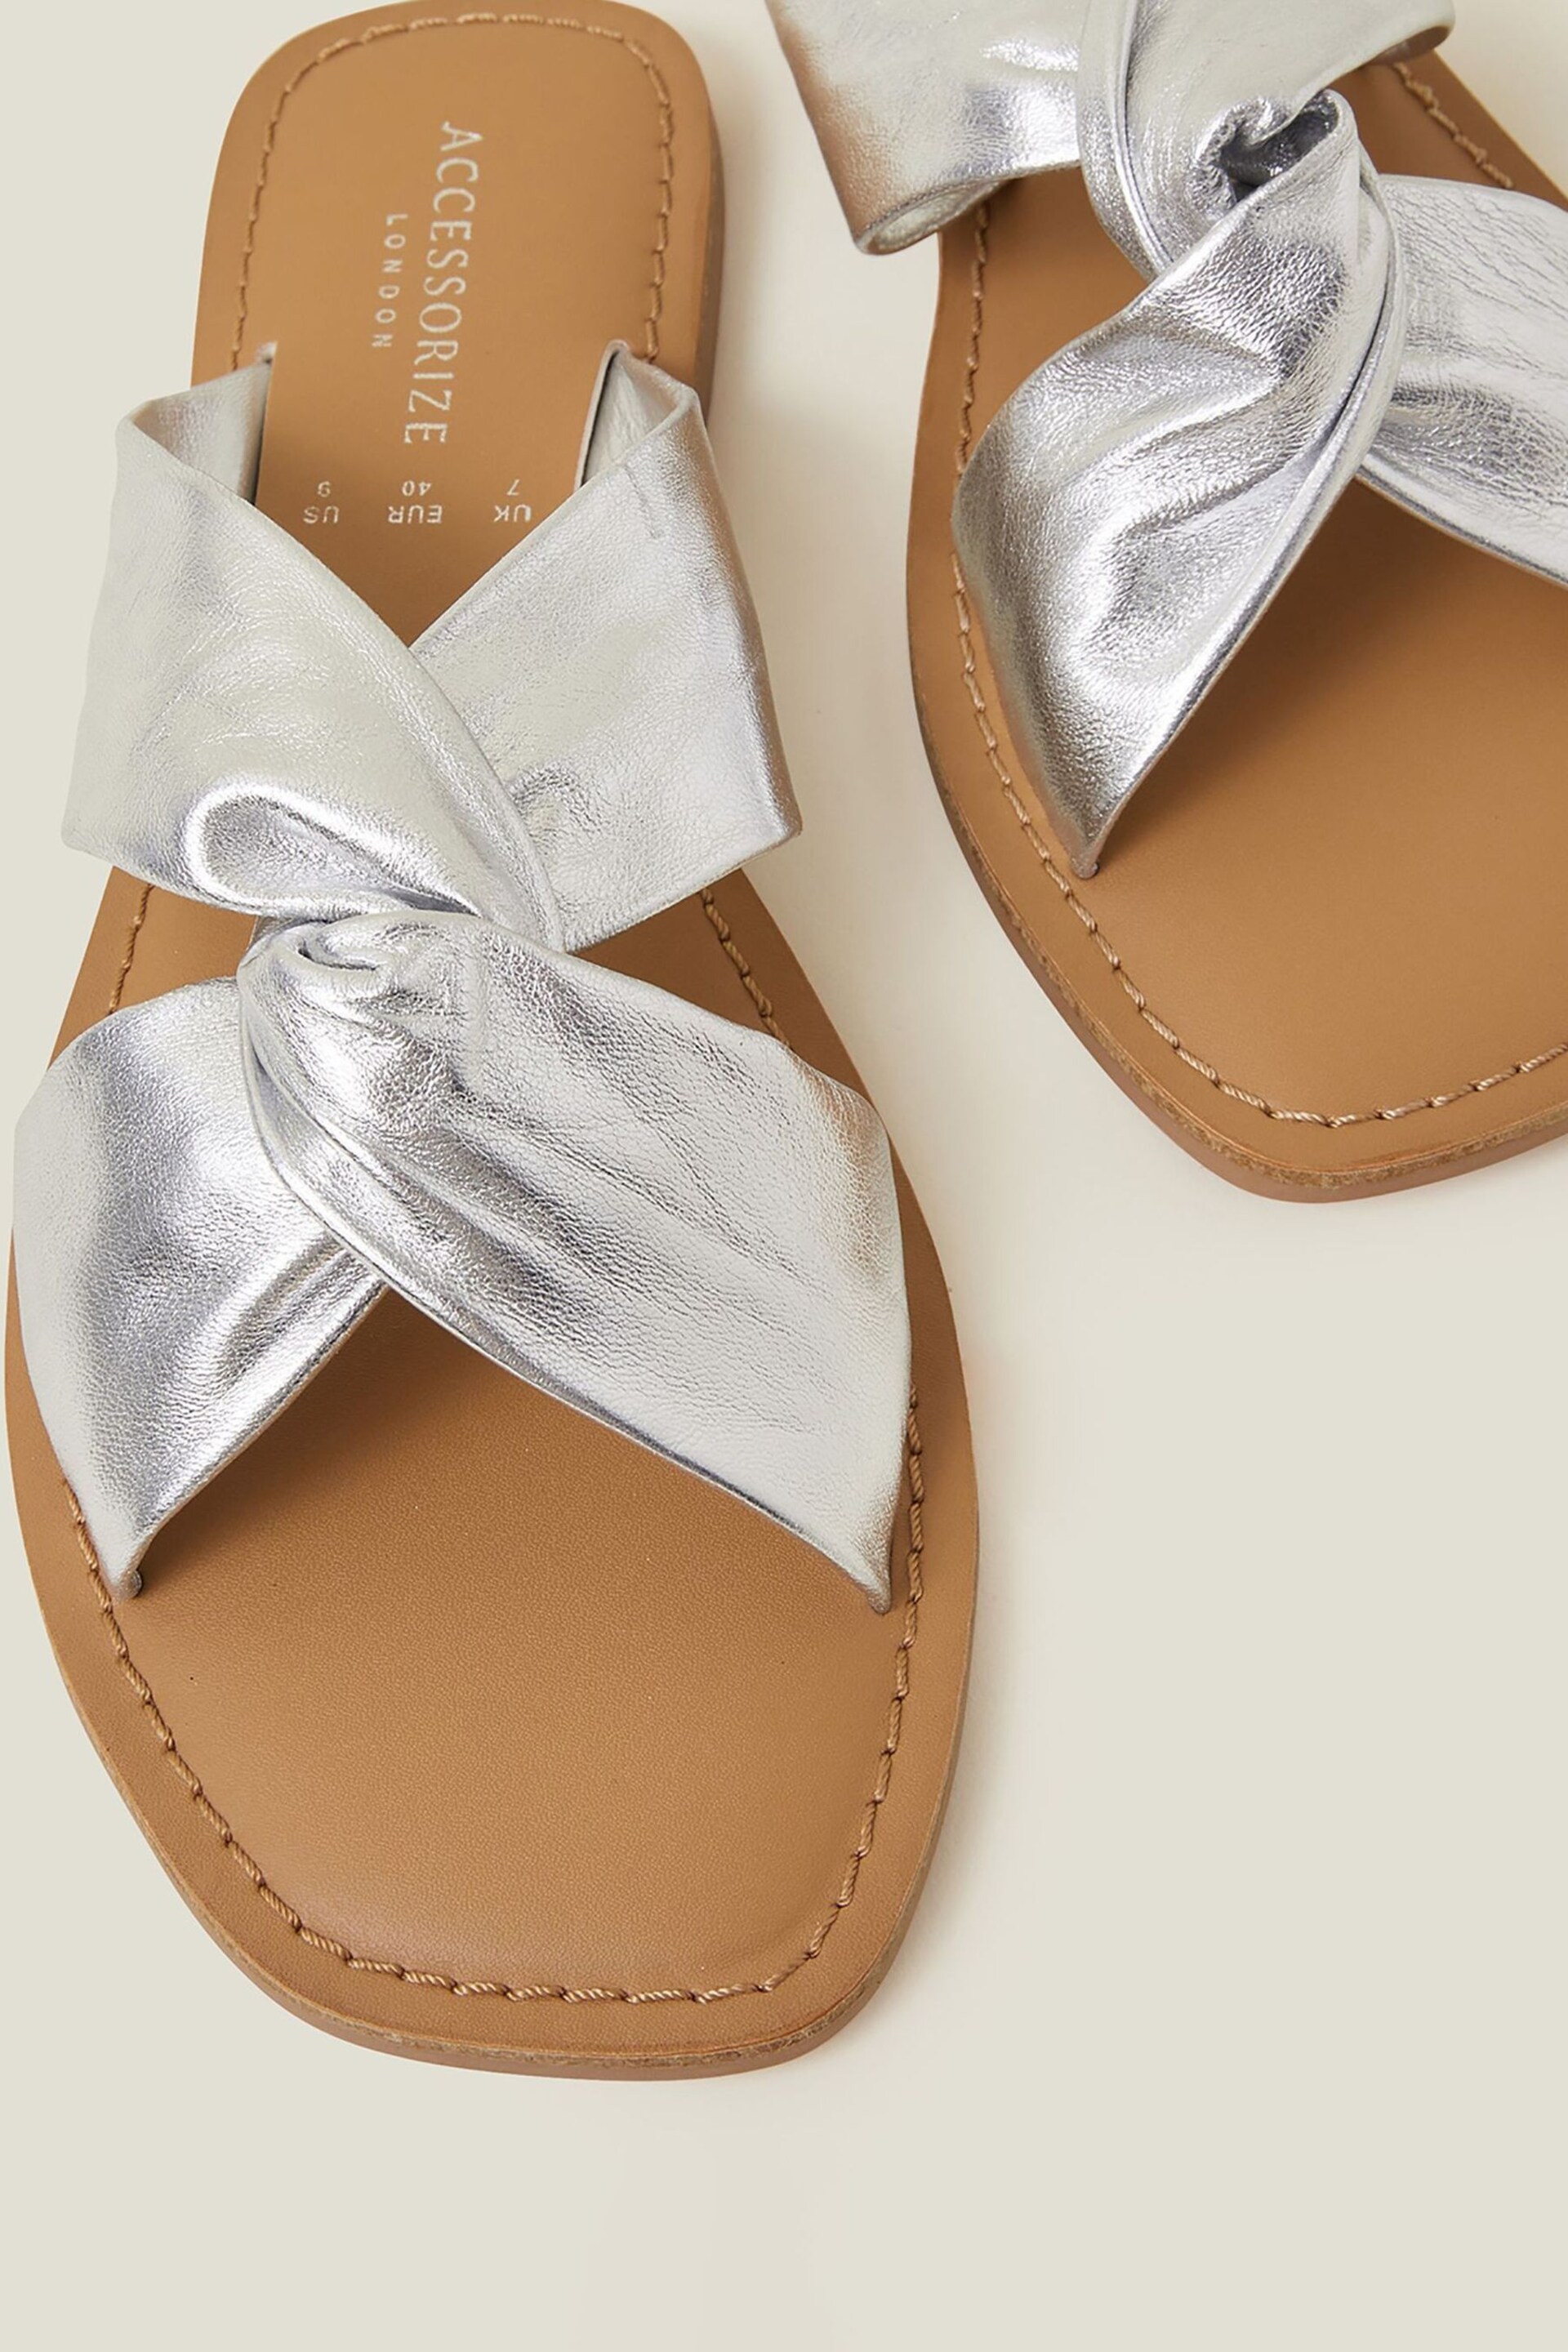 Accessorize Silver Leather Knot Sandals - Image 4 of 4